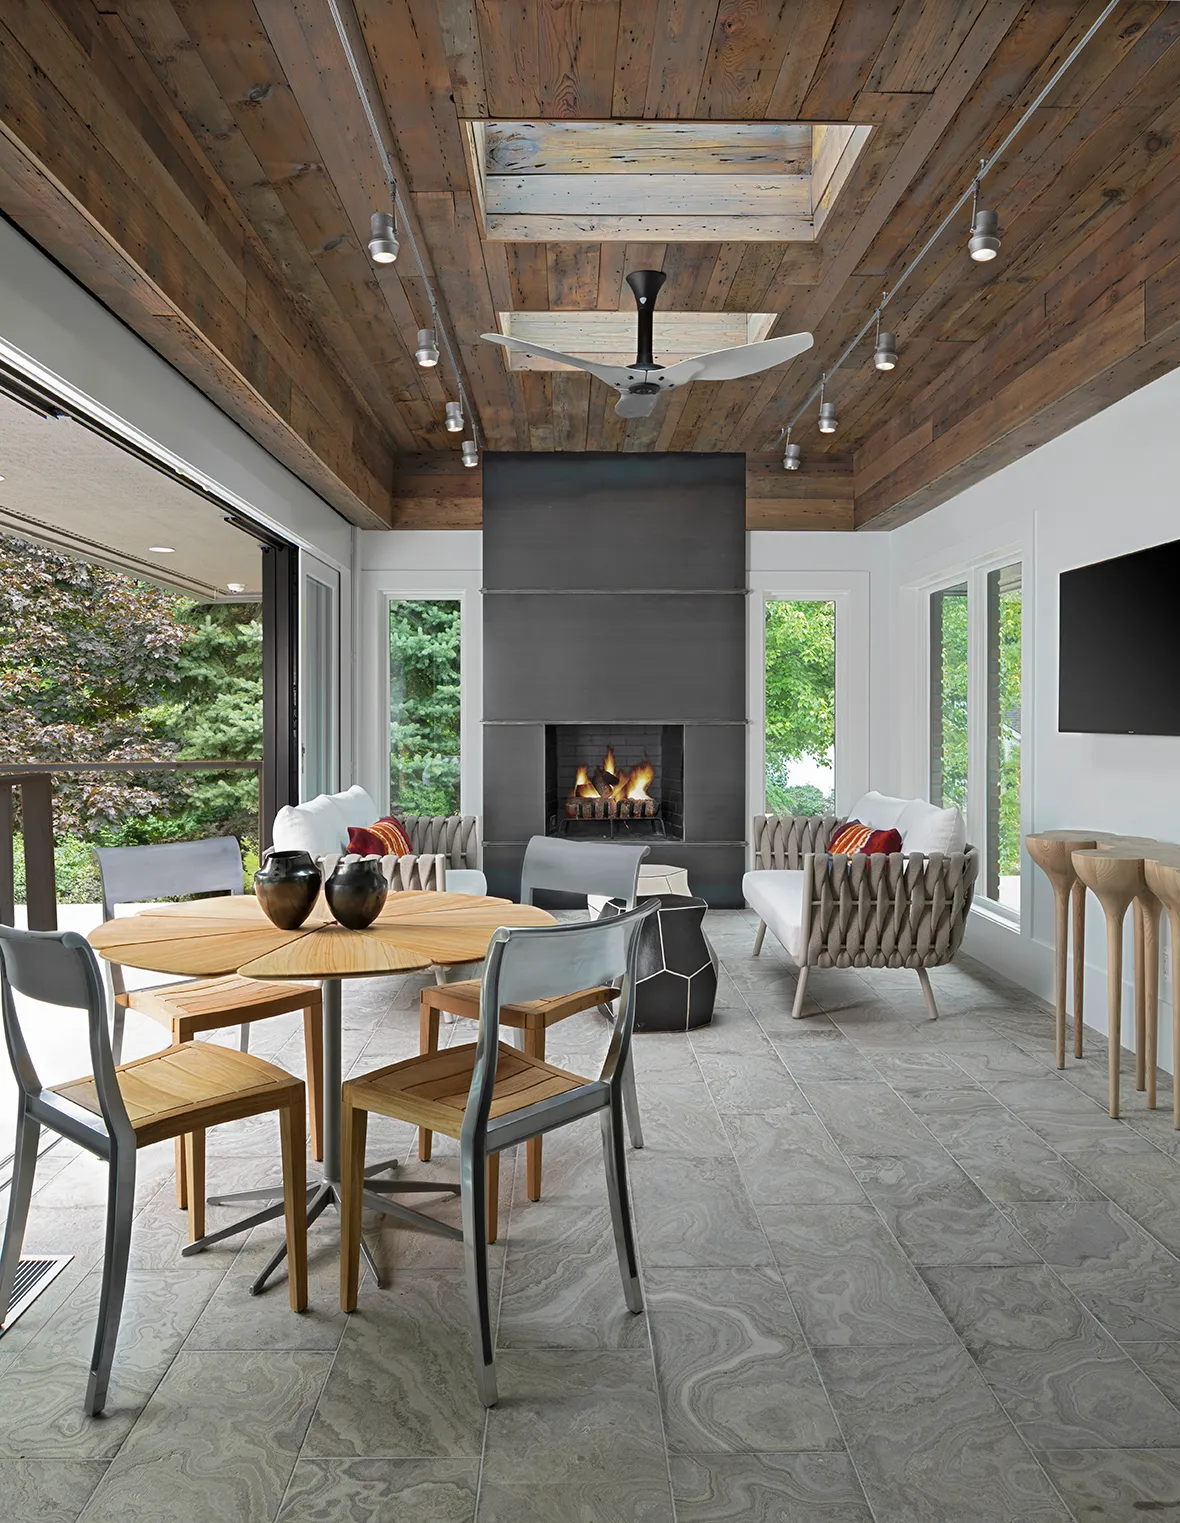 The Lake House Diamond Building Fabulous Outdoor Living Area with Fireplace and Wood Ceiling